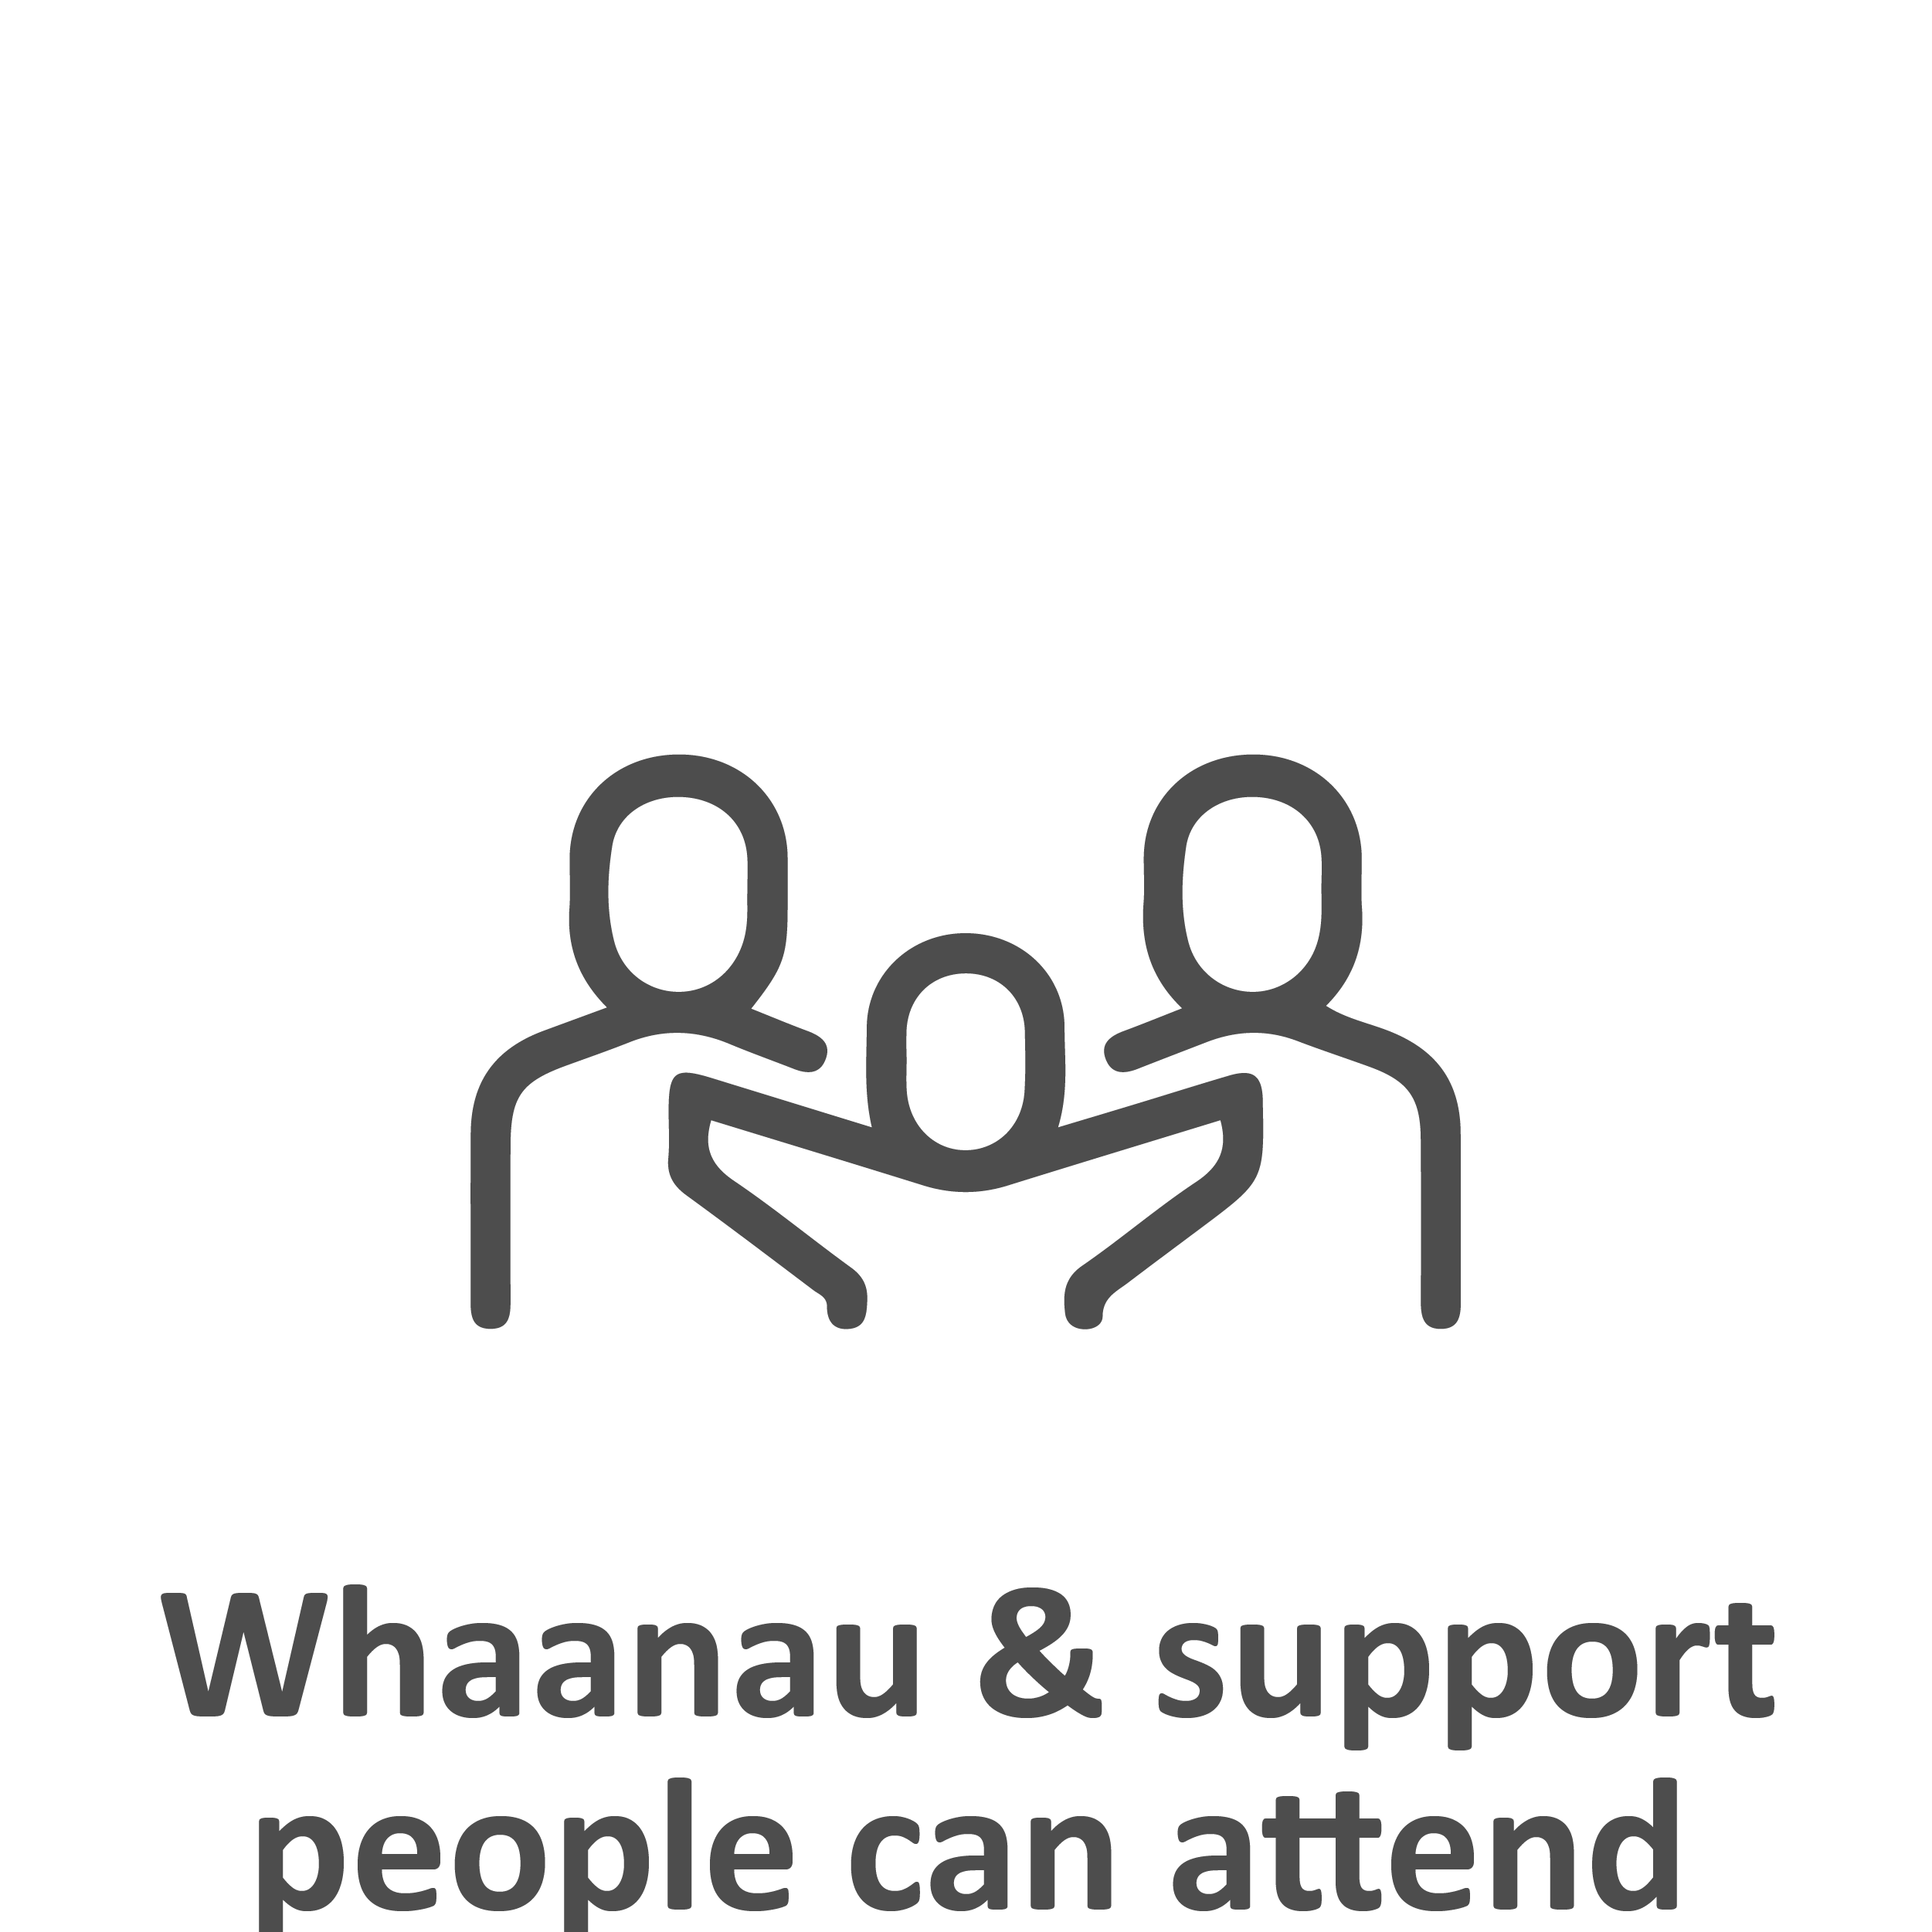 4 Whaanau support people can attend